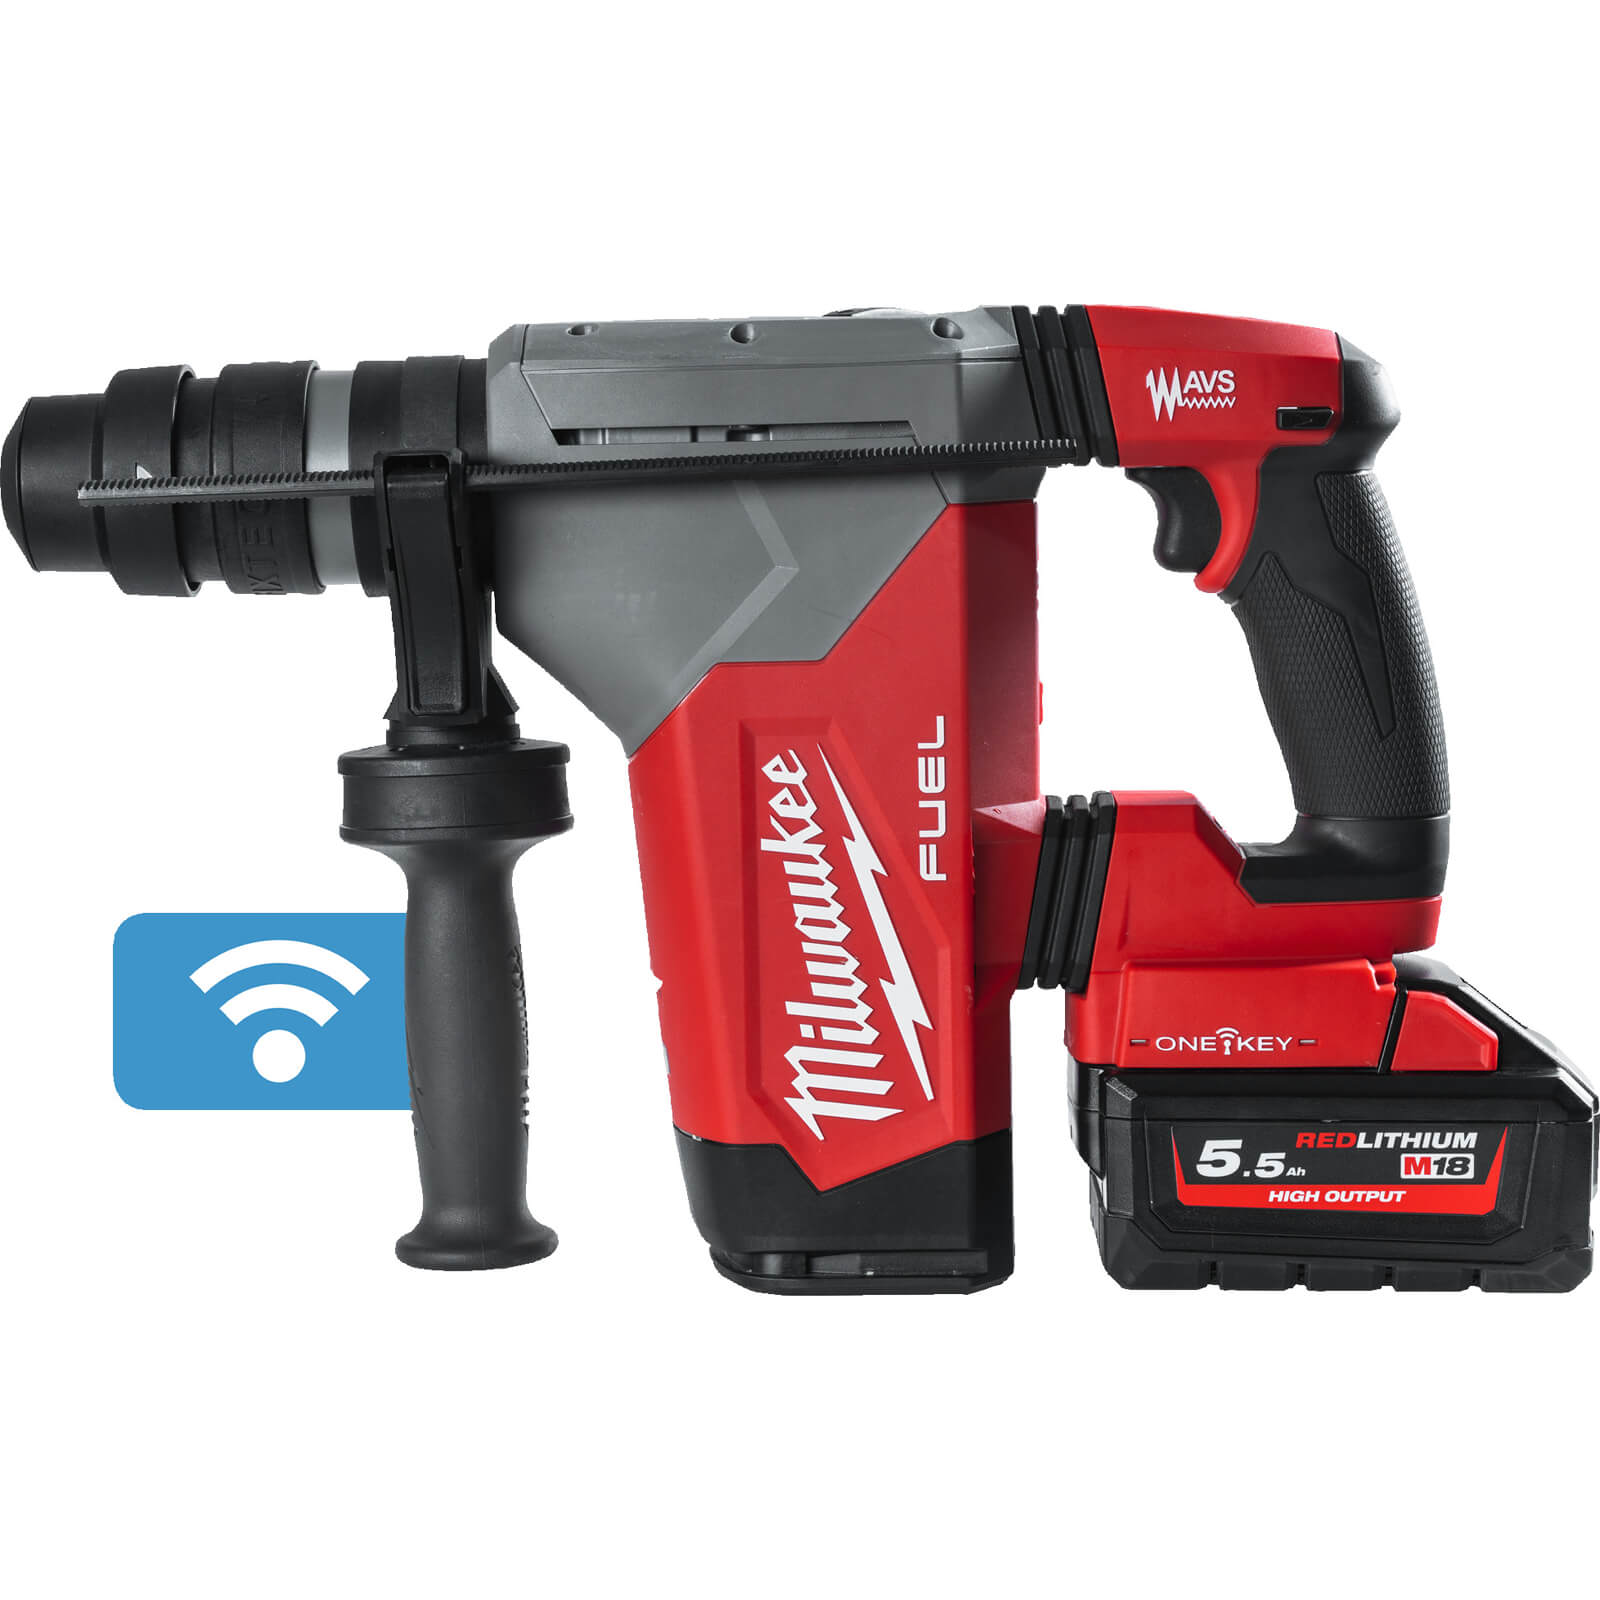 Image of Milwaukee M18 ONEFHPX Fuel 18v Cordless Brushless SDS Plus Drill 2 x 5.5ah Li-ion Charger Case